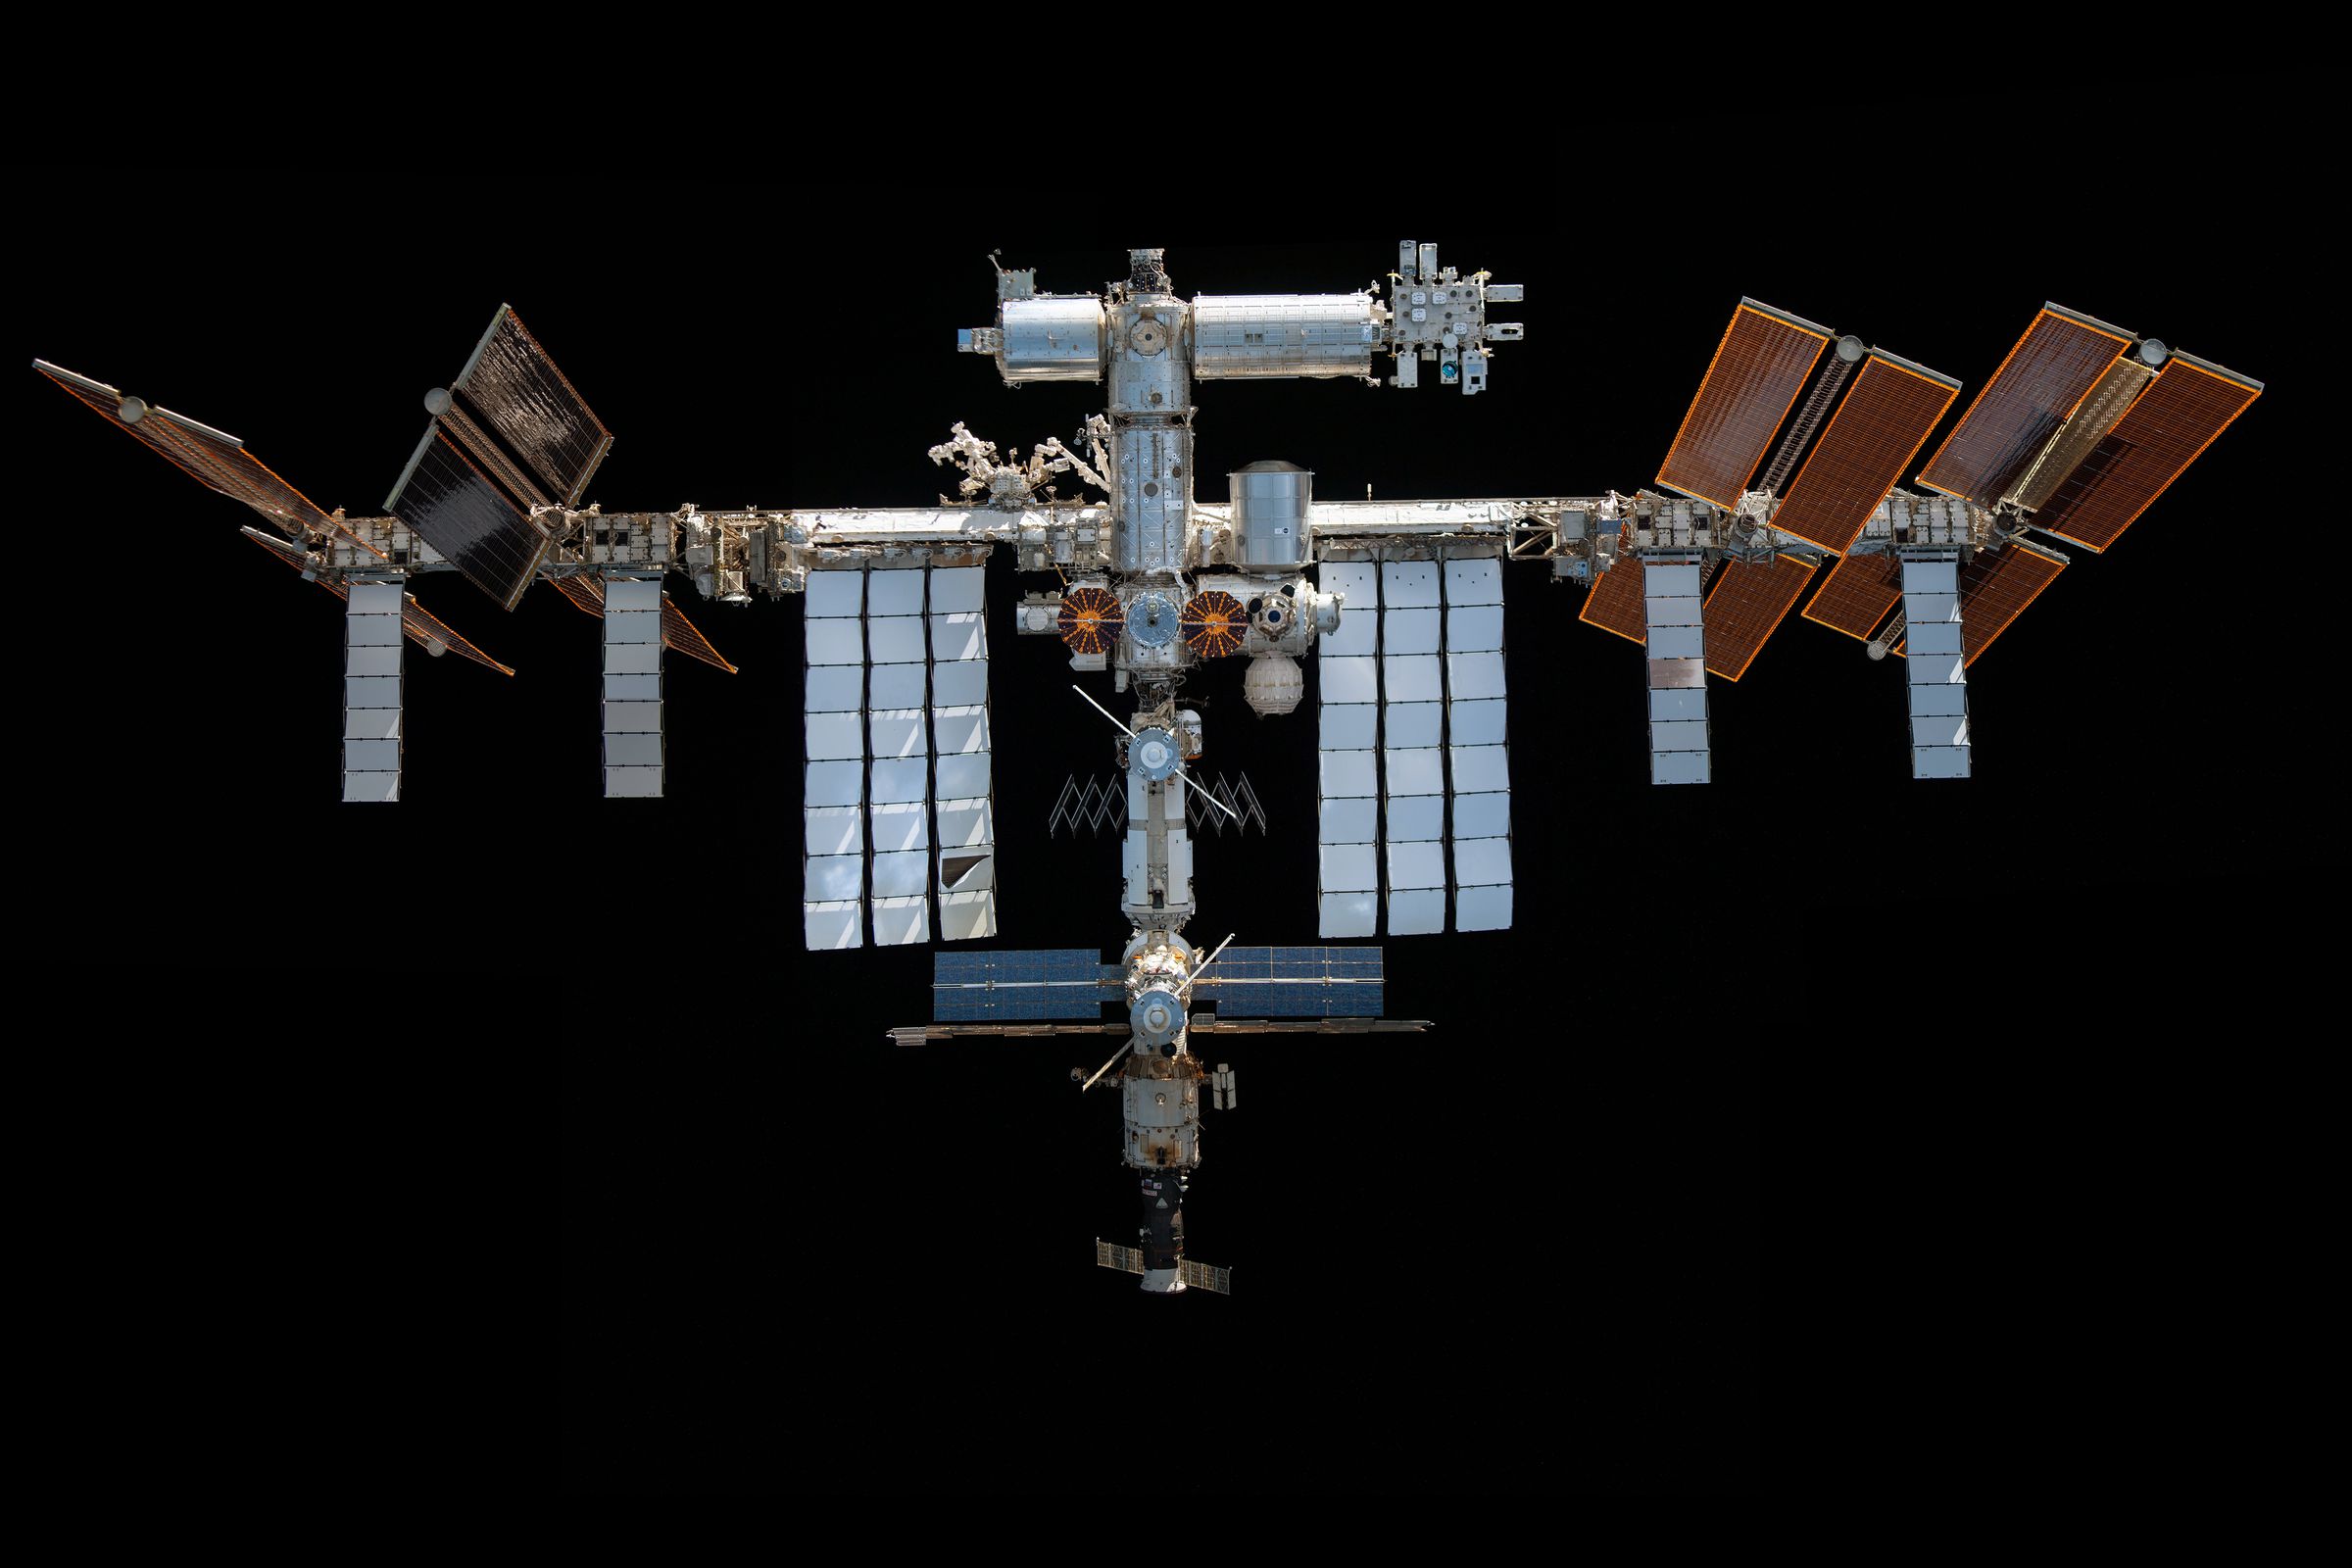 The International Space Station as seen from SpaceX’s Crew Dragon departing the ISS